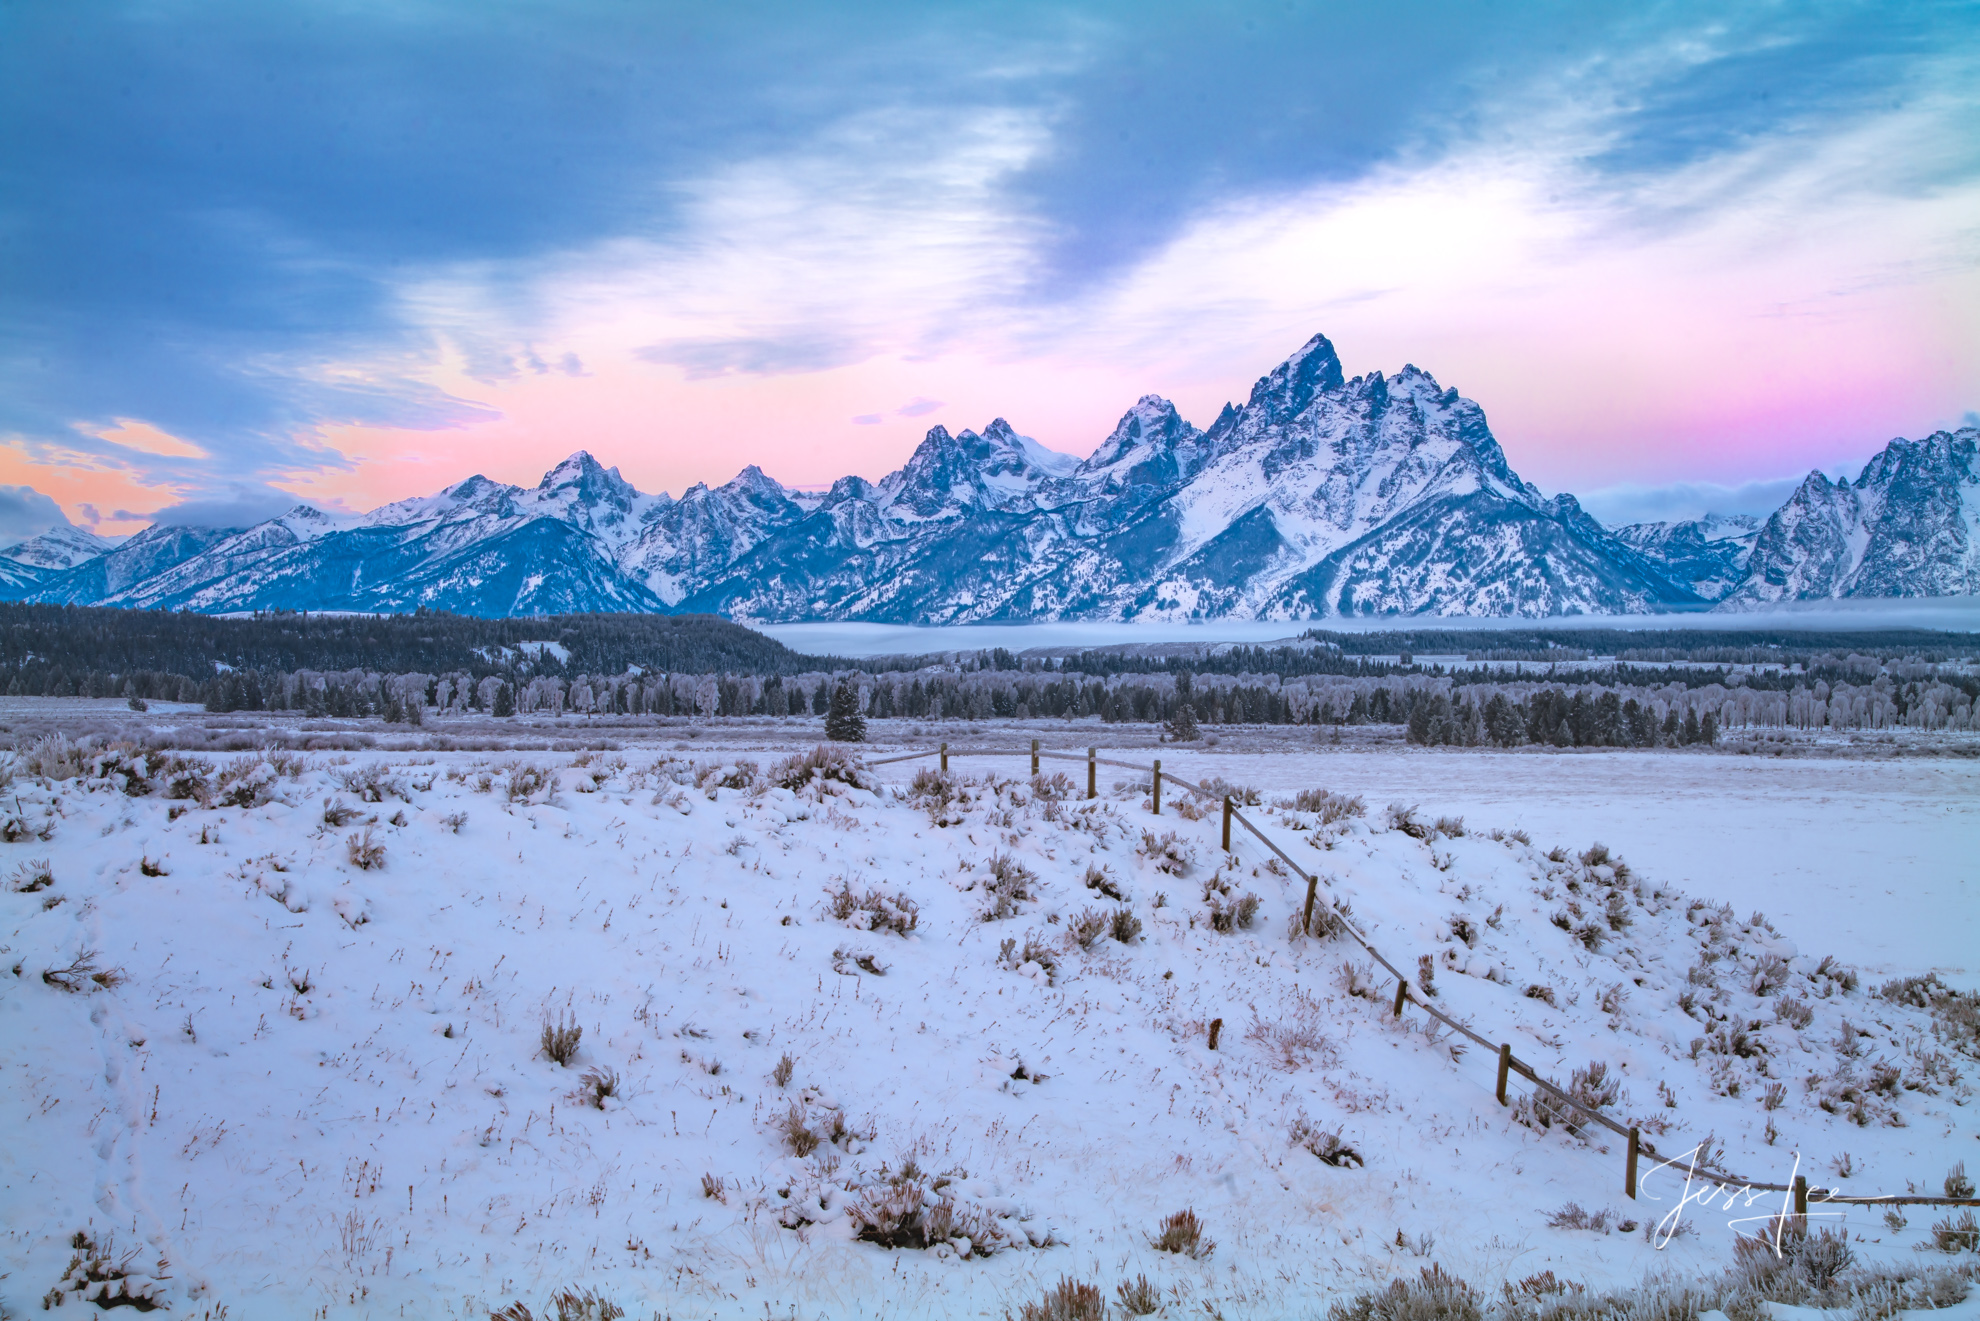 Grand Teton Early Winter Photography Workshop and Instructional Photo Tour. Photo